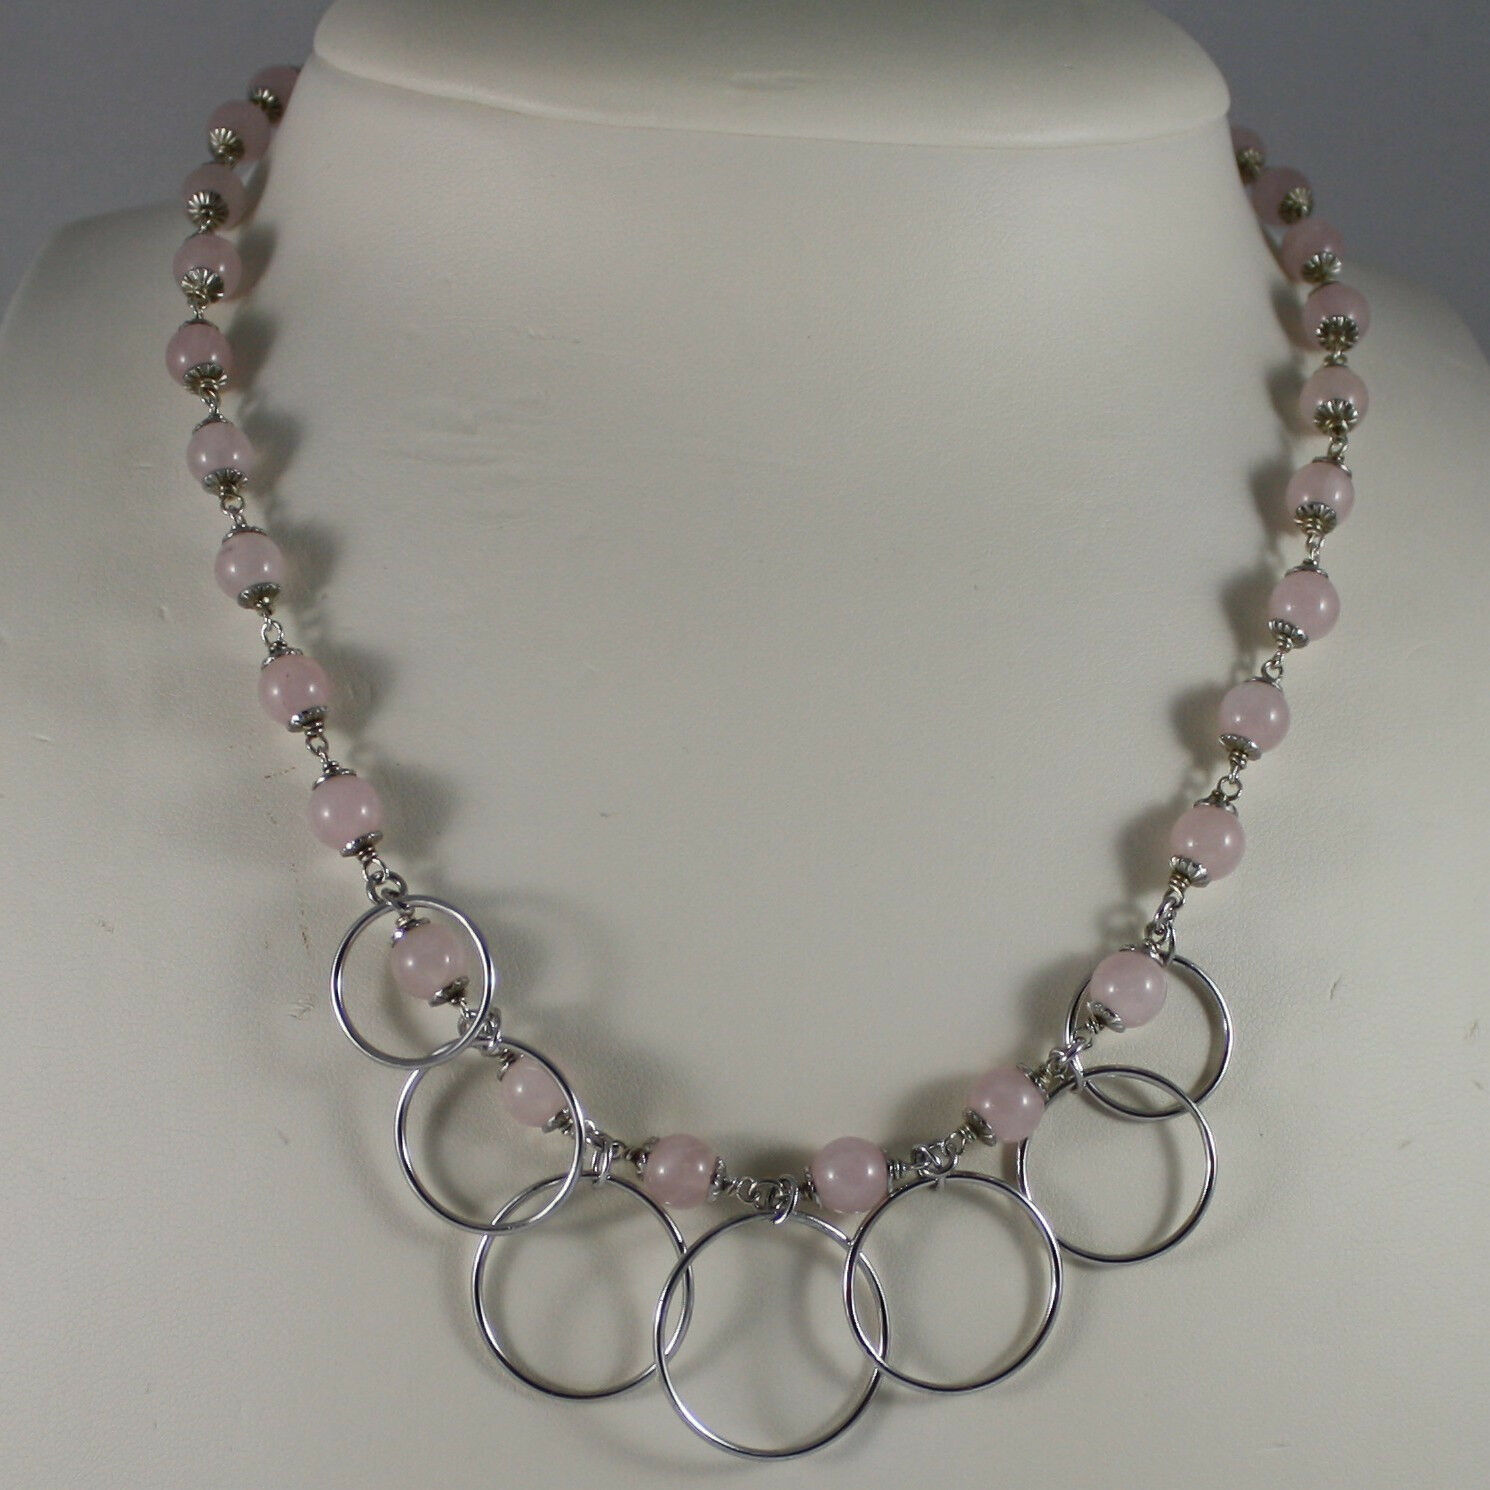 Primary image for .925 SILVER RHODIUM NECKLACE WITH PINK QUARTZ AND SILVER CIRCLES PENDANT